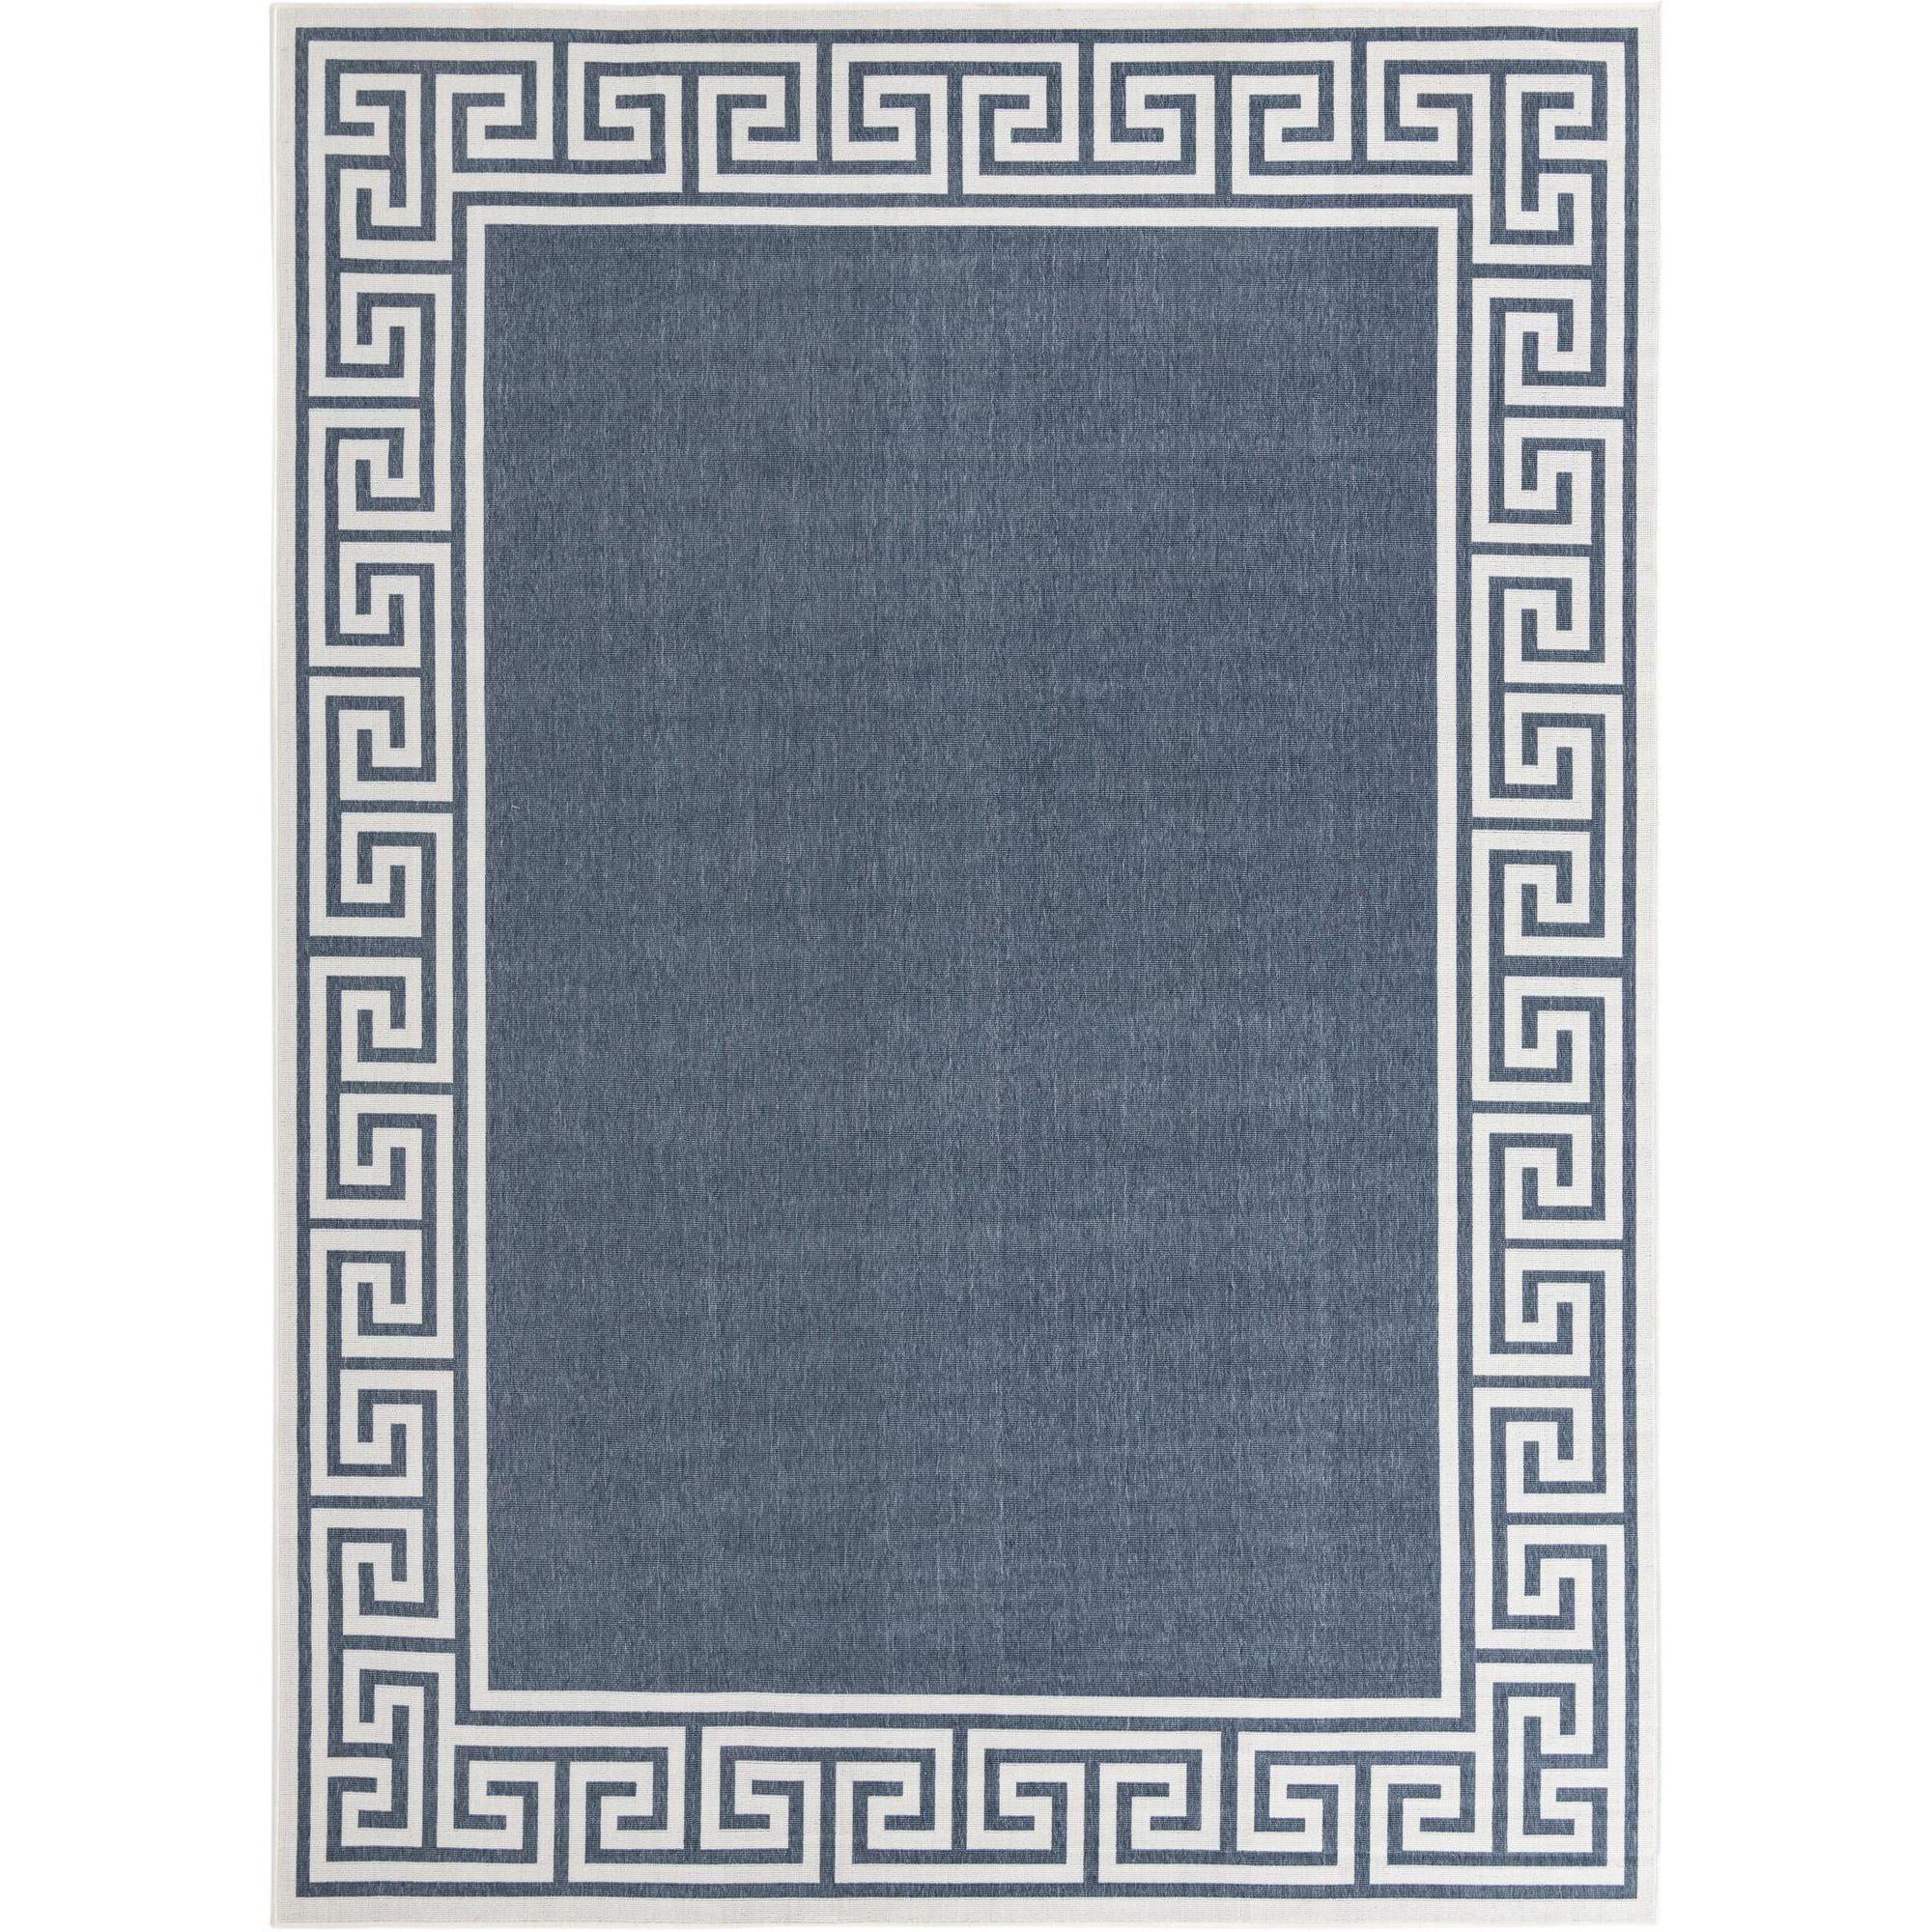 Navy Blue and Ivory Geometric Outdoor Rug 9' x 12'